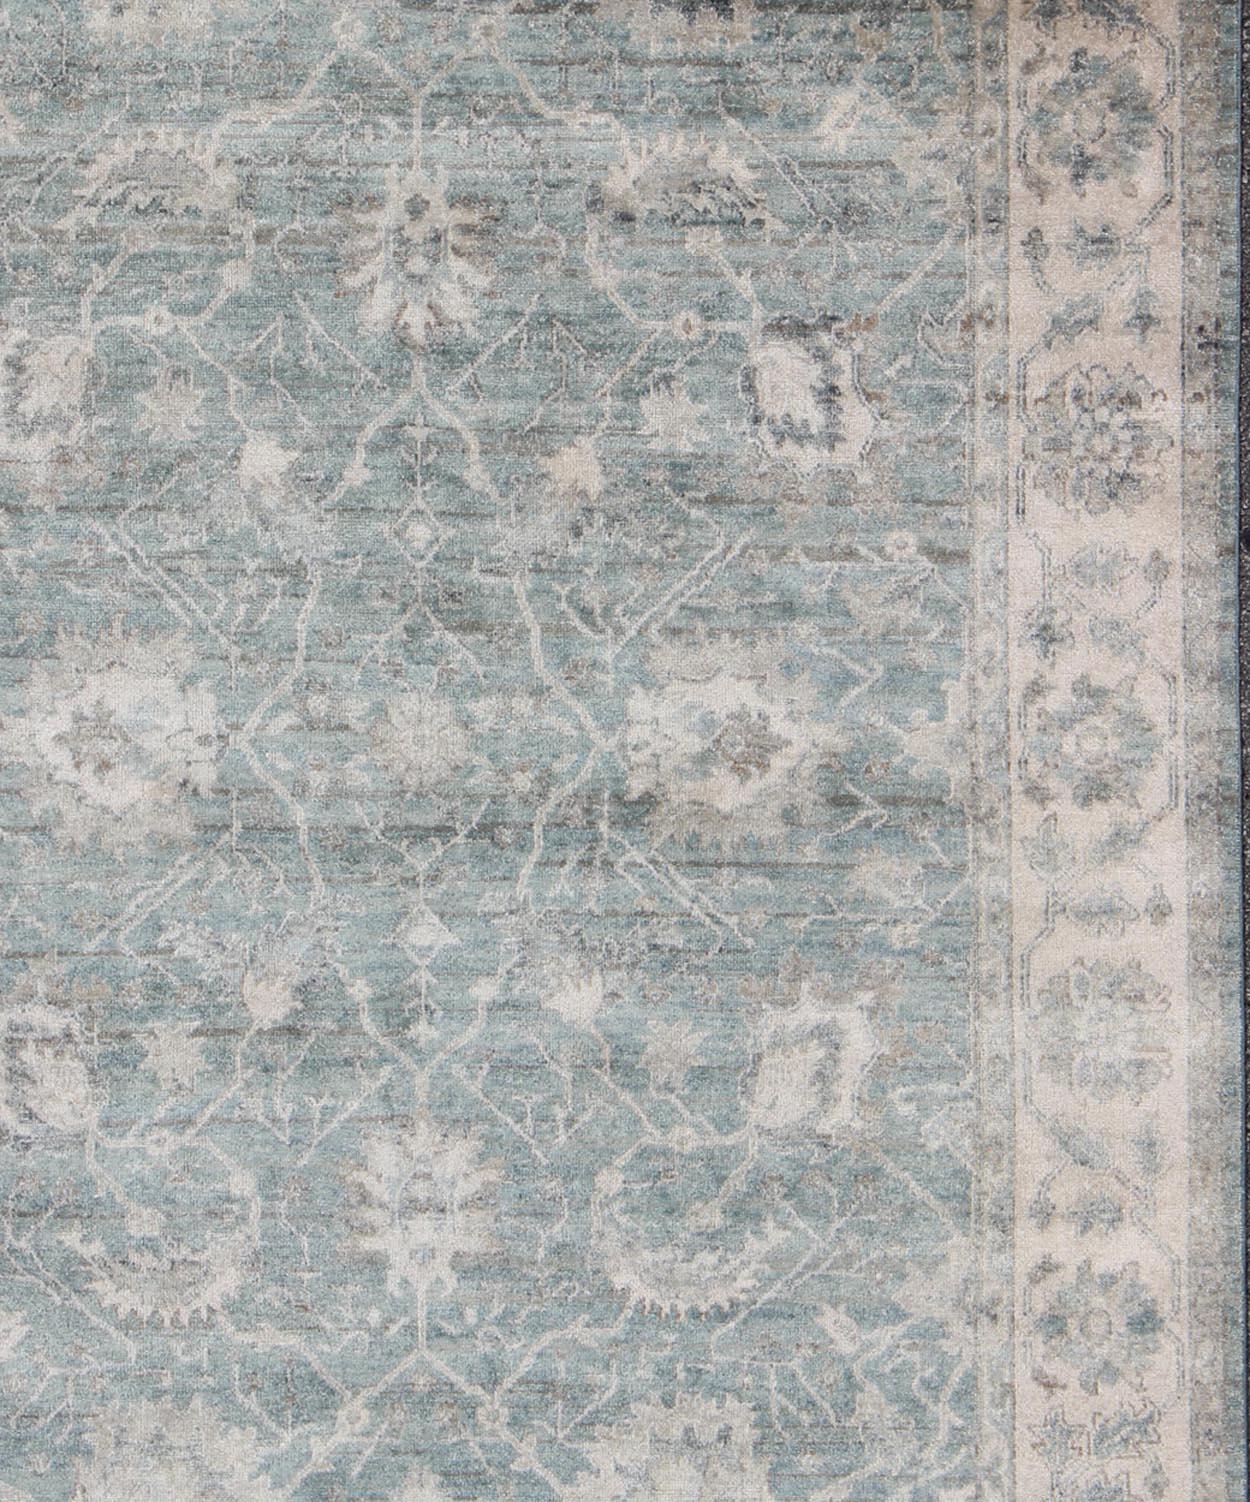 Wool Keivan Woven Arts Turkish Oushak in Seafoam Green, Ivory and Light Gray For Sale